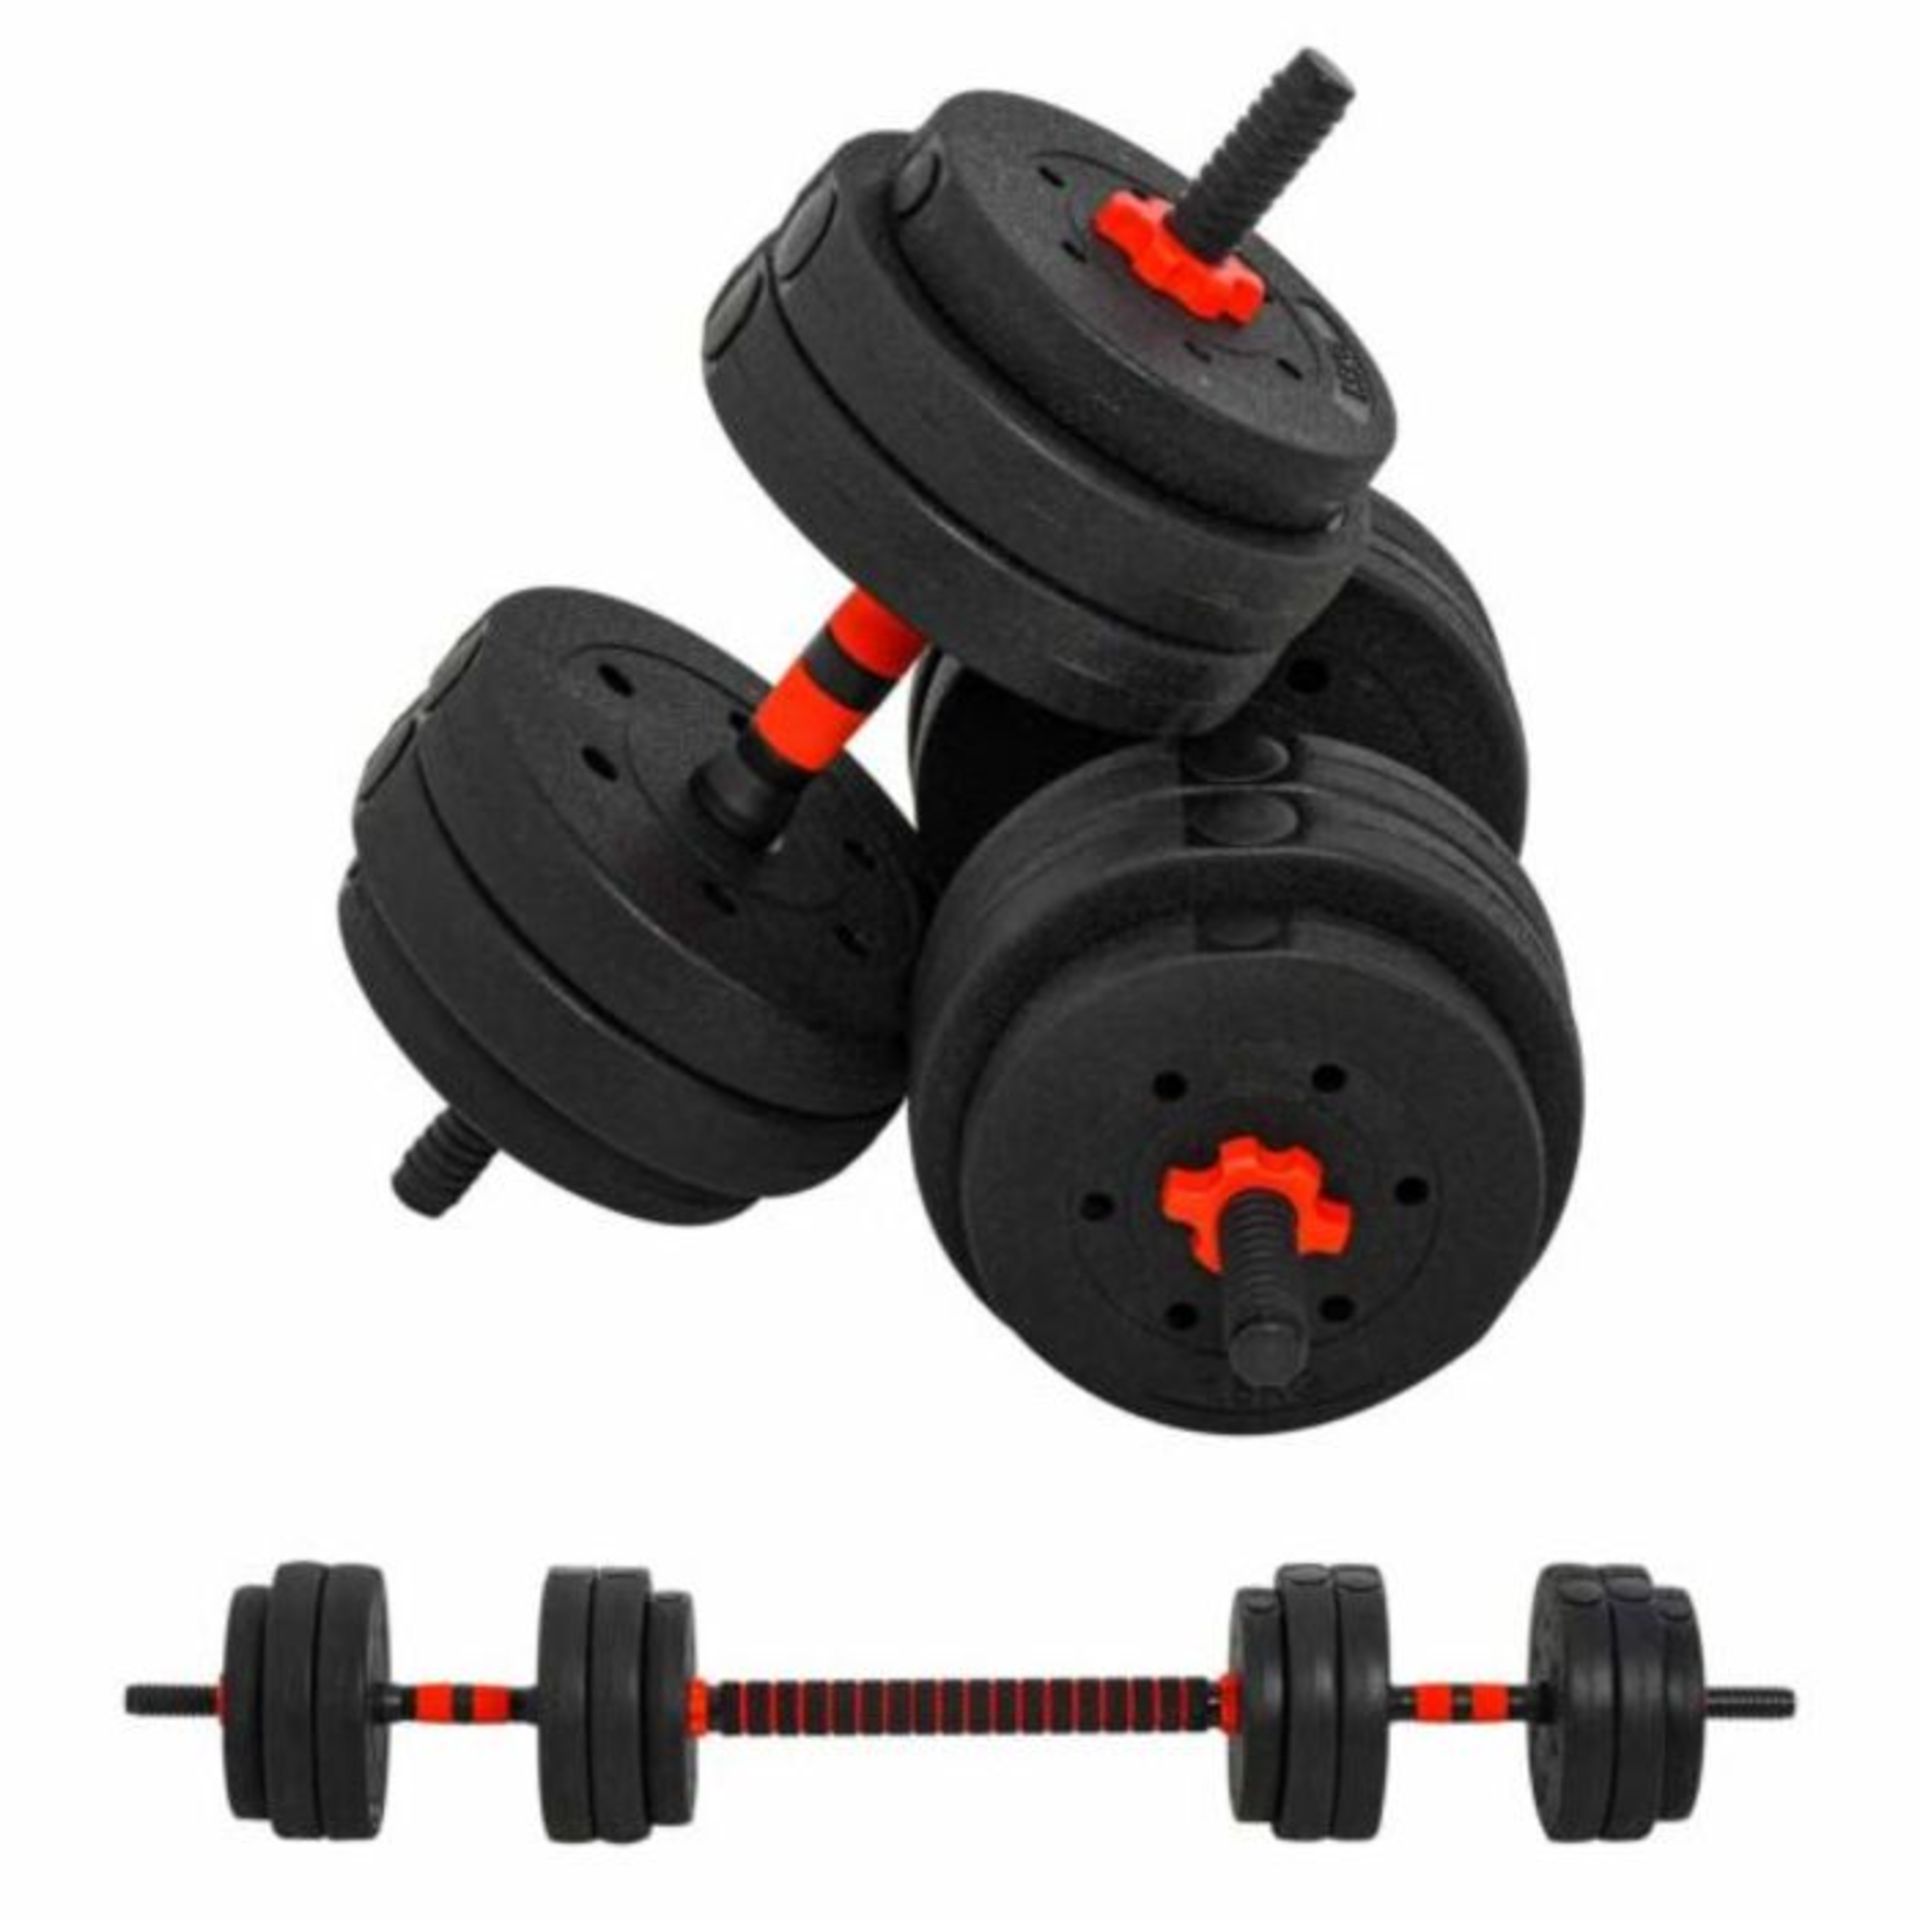 Hom Com 2 in1 Barbell/Dumb bell 30kg weight set, new and boxed, Similar sets retail at around £50 - Image 2 of 4